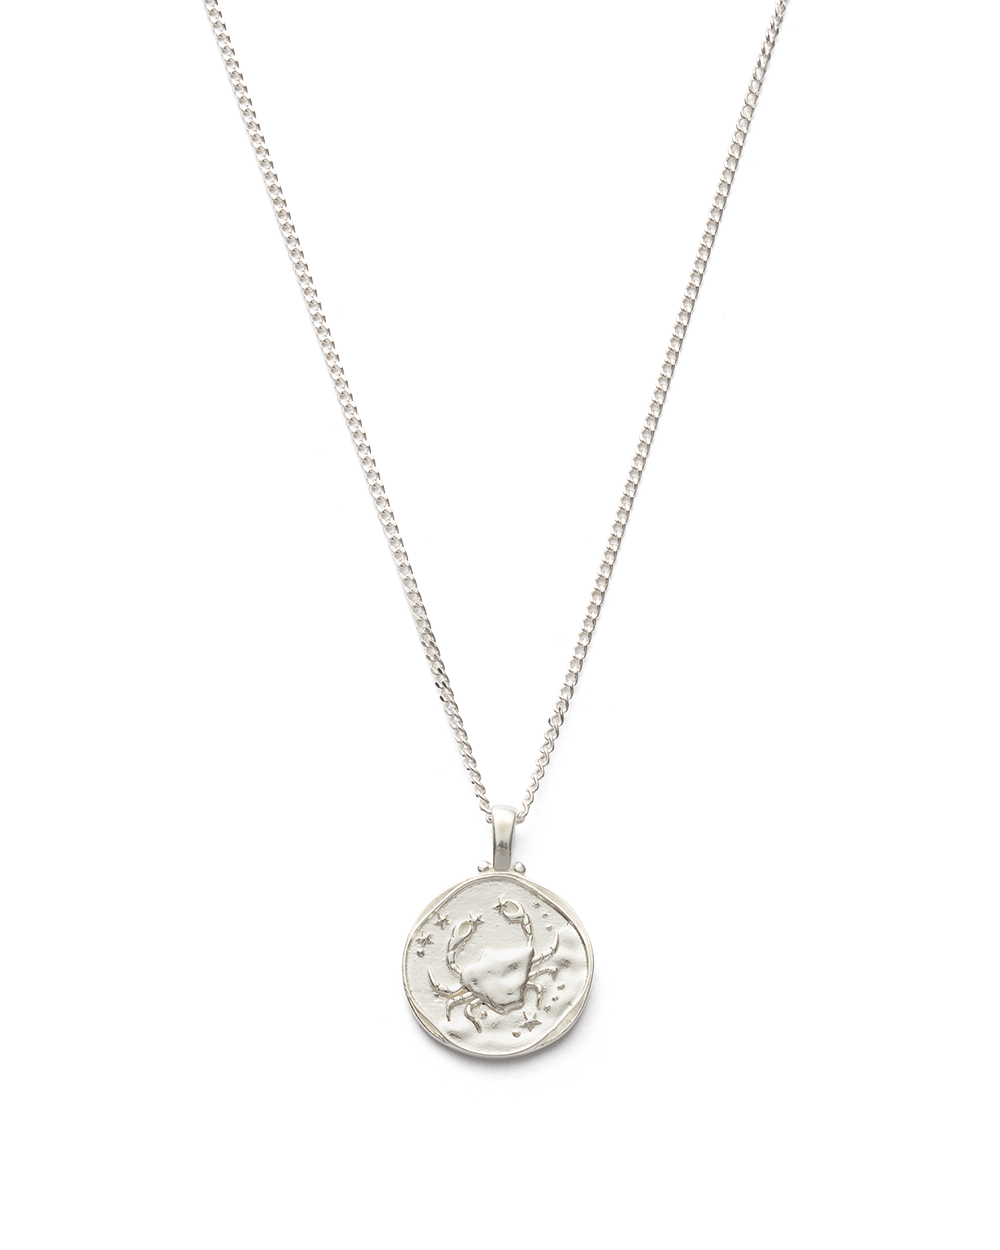 CANCER ZODIAC NECKLACE (STERLING SILVER) - IMAGE 1